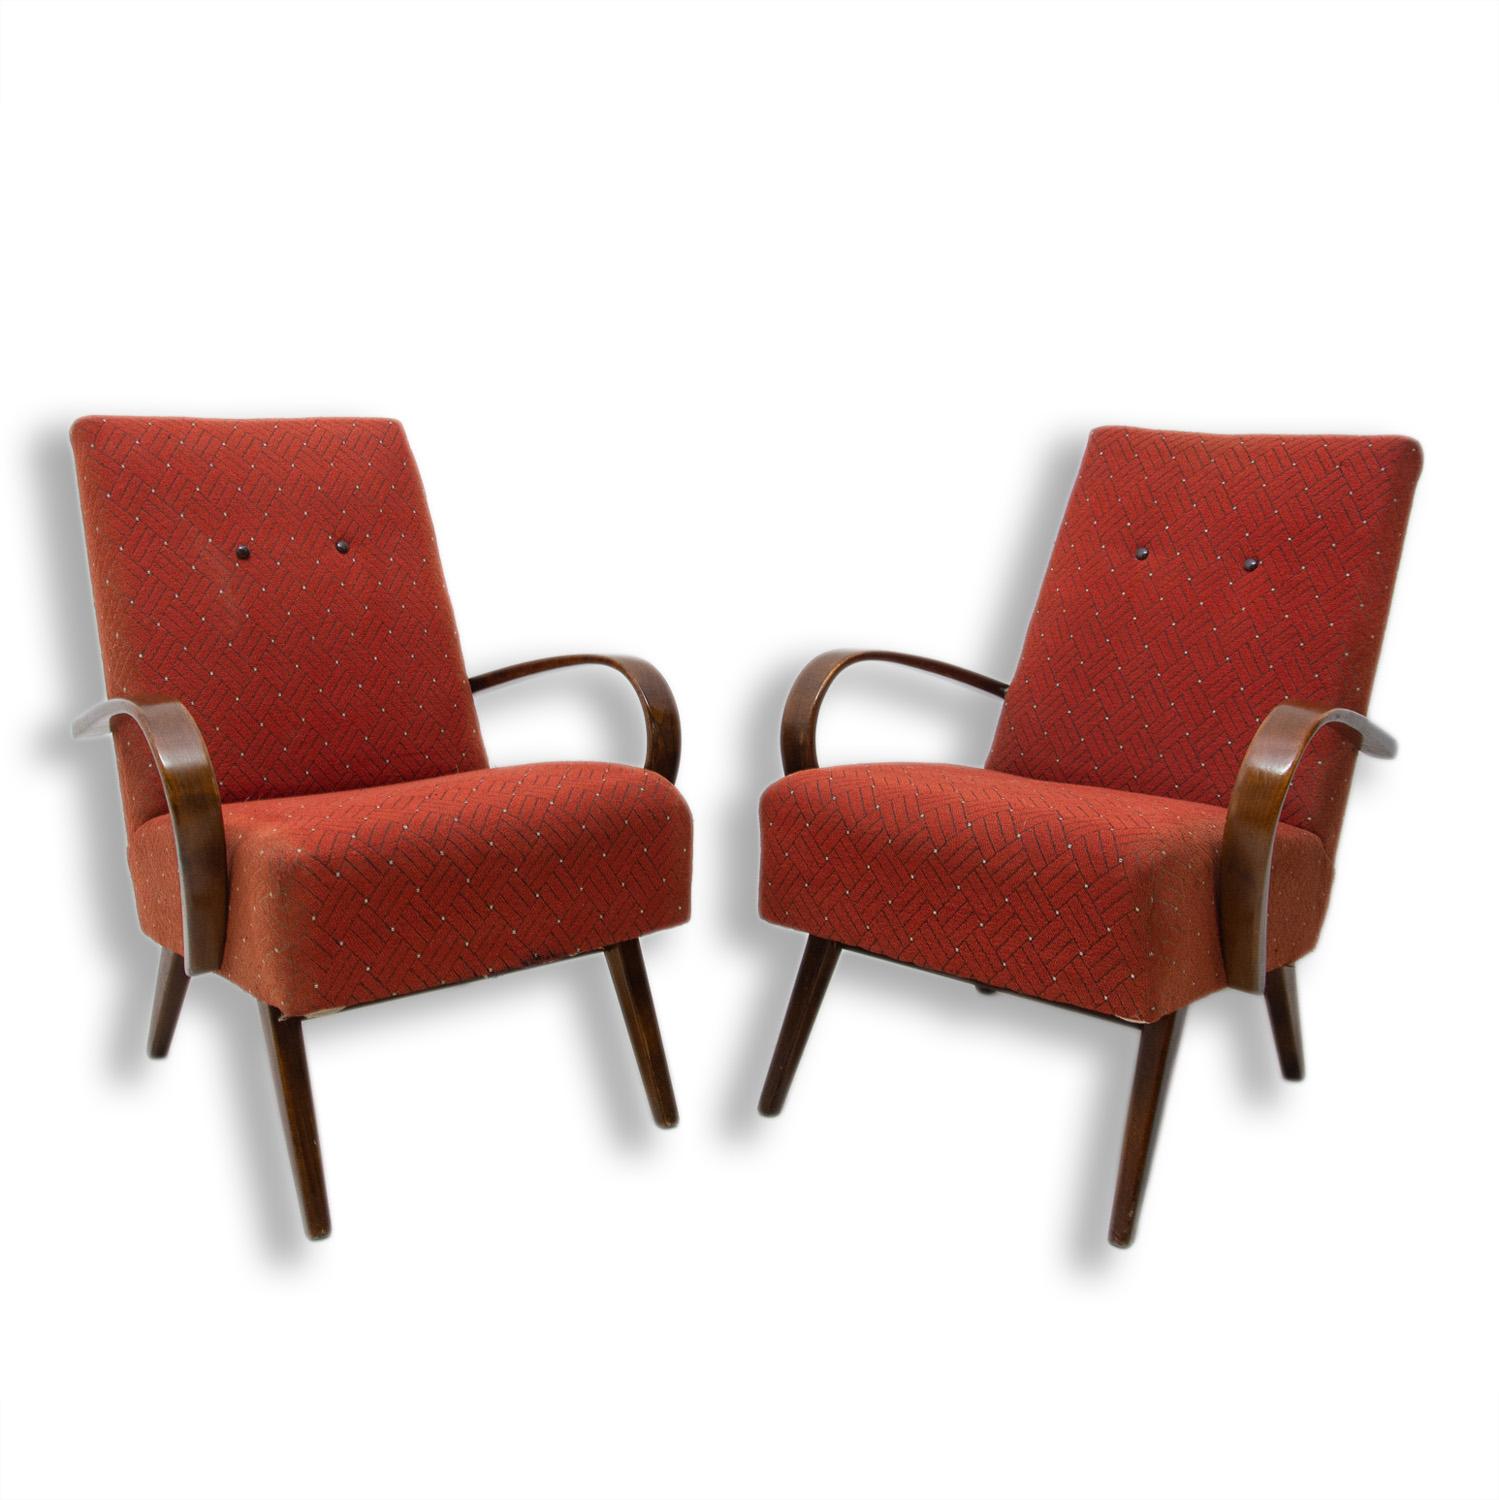 These bentwood armchairs were designed by Jaroslav Šmídek and made in the former Czechoslovakia in the 1960s.

The chairs are stable and comfortable. They are in good Vintage condition, shows signs of age and using.

Price is for the pair.